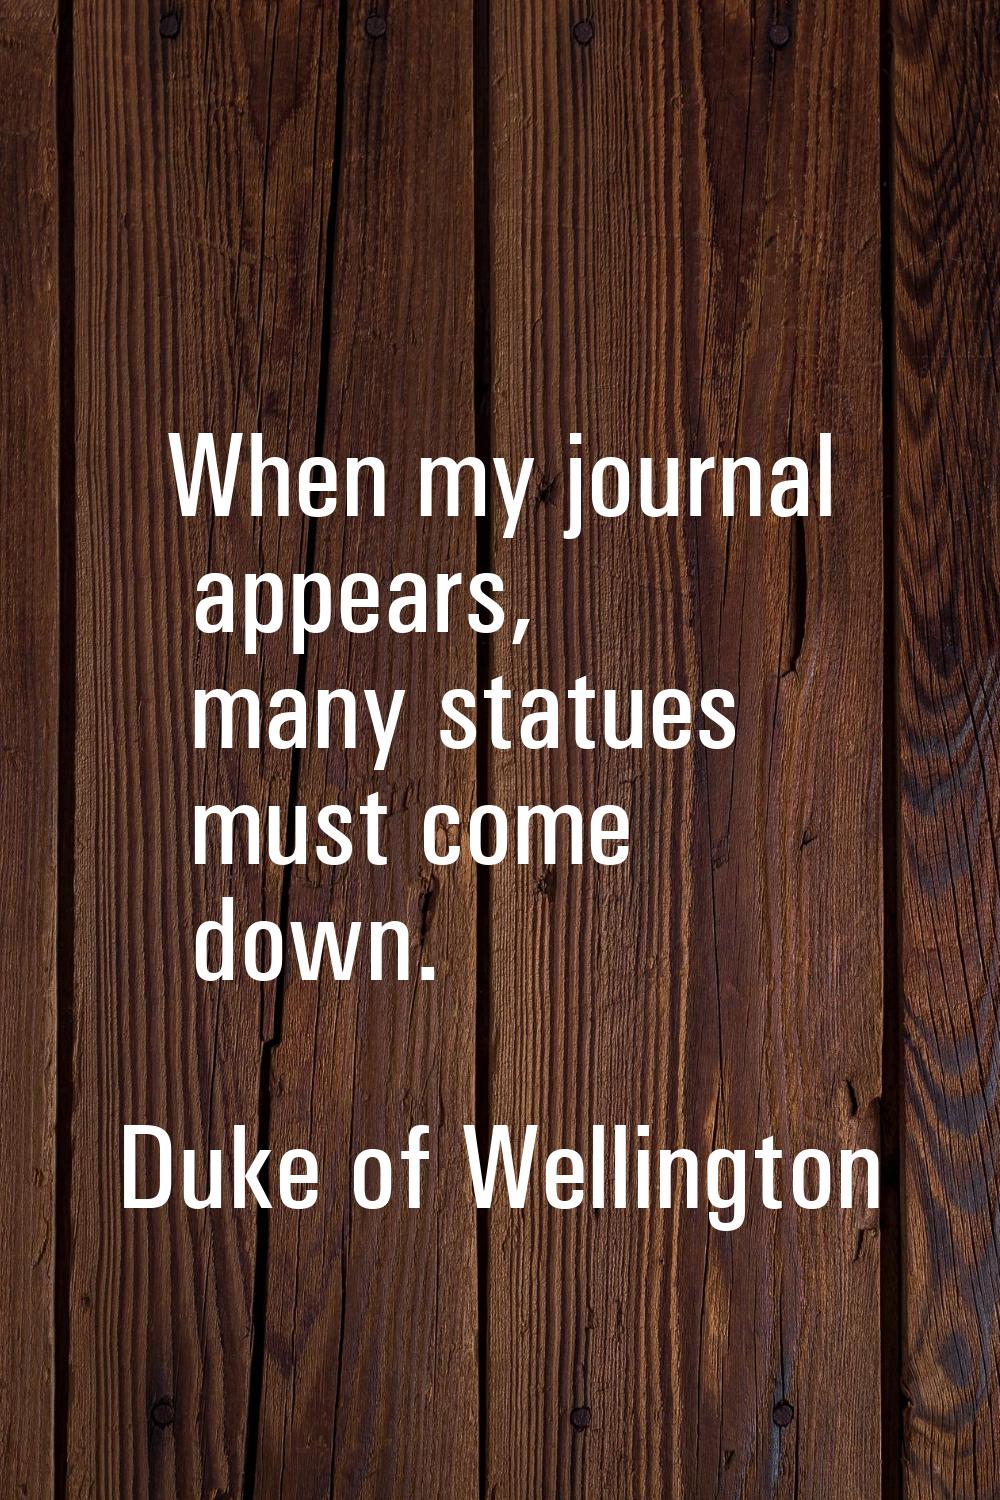 When my journal appears, many statues must come down.